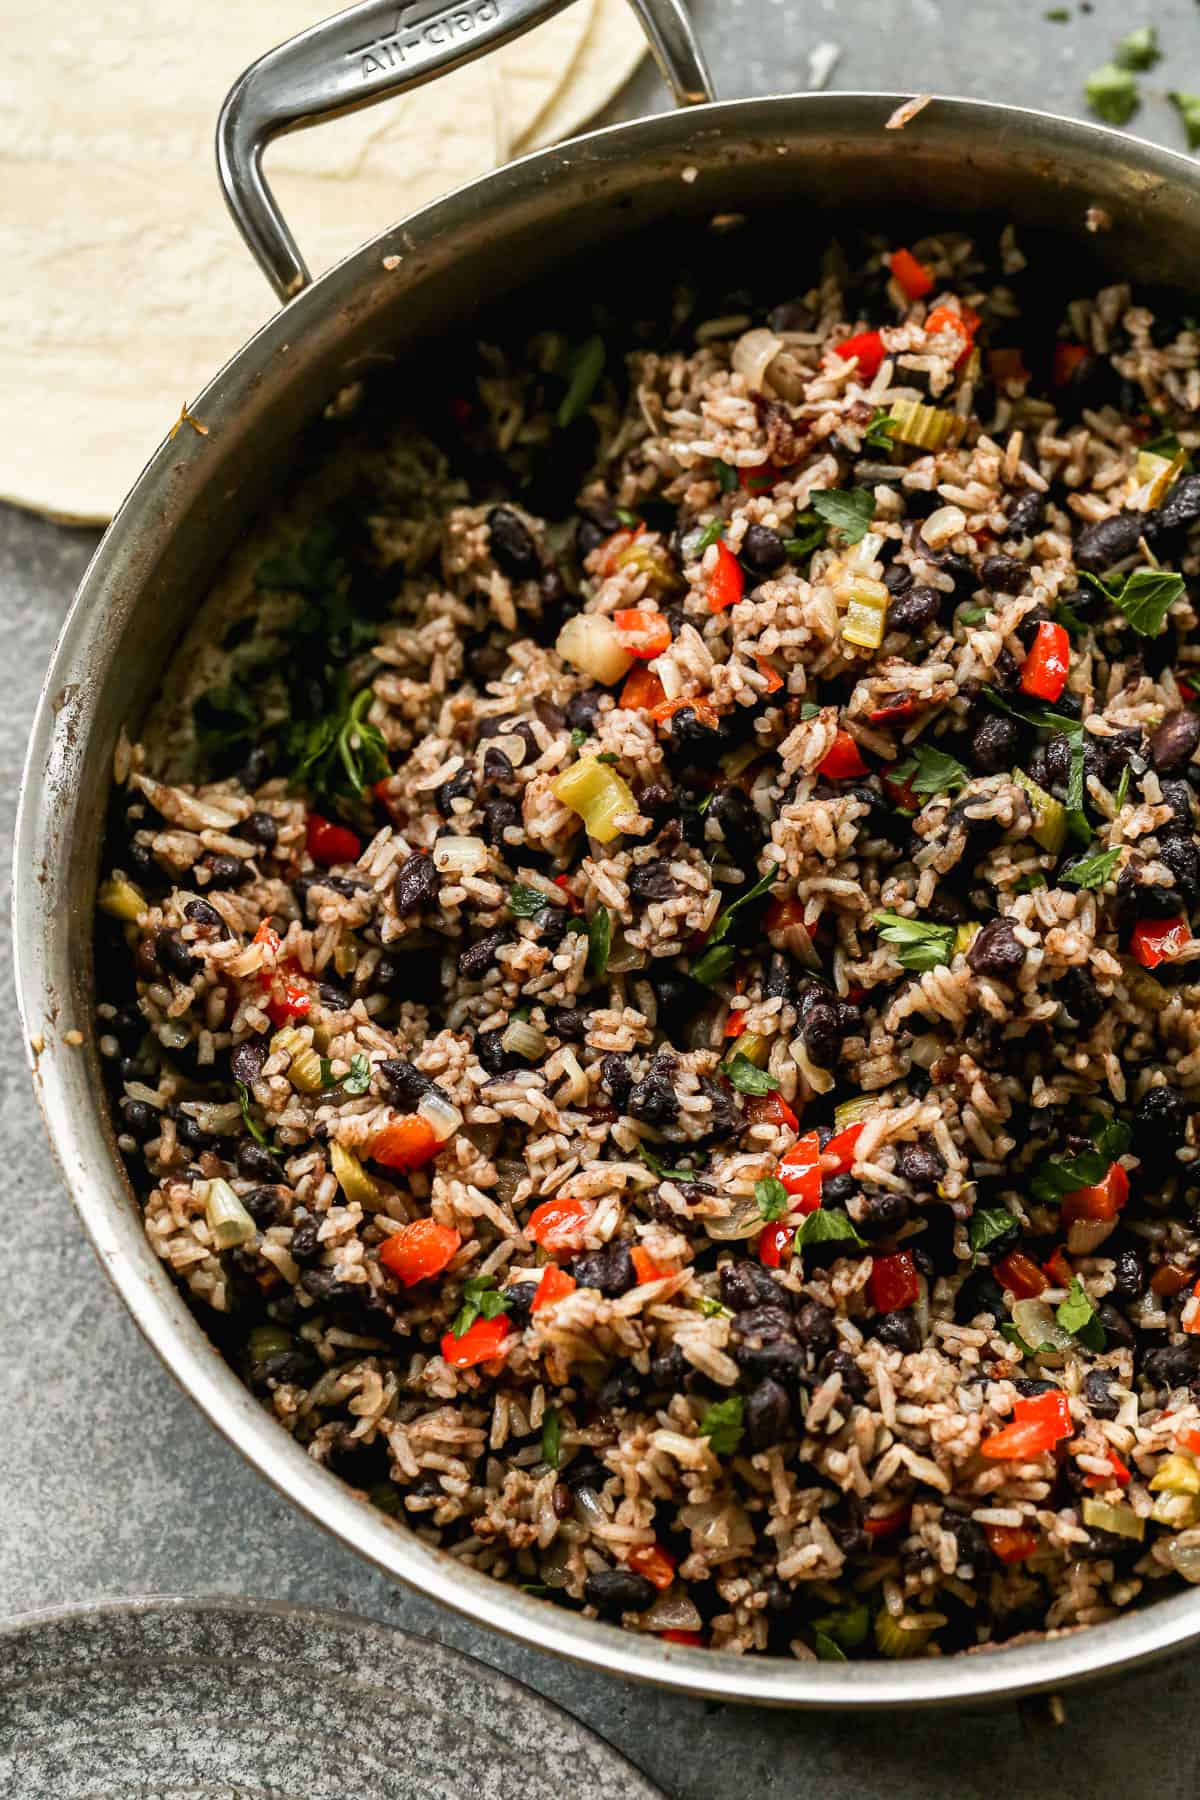 An easy gallo pinto recipe in a stainless steel pan, ready to serve.